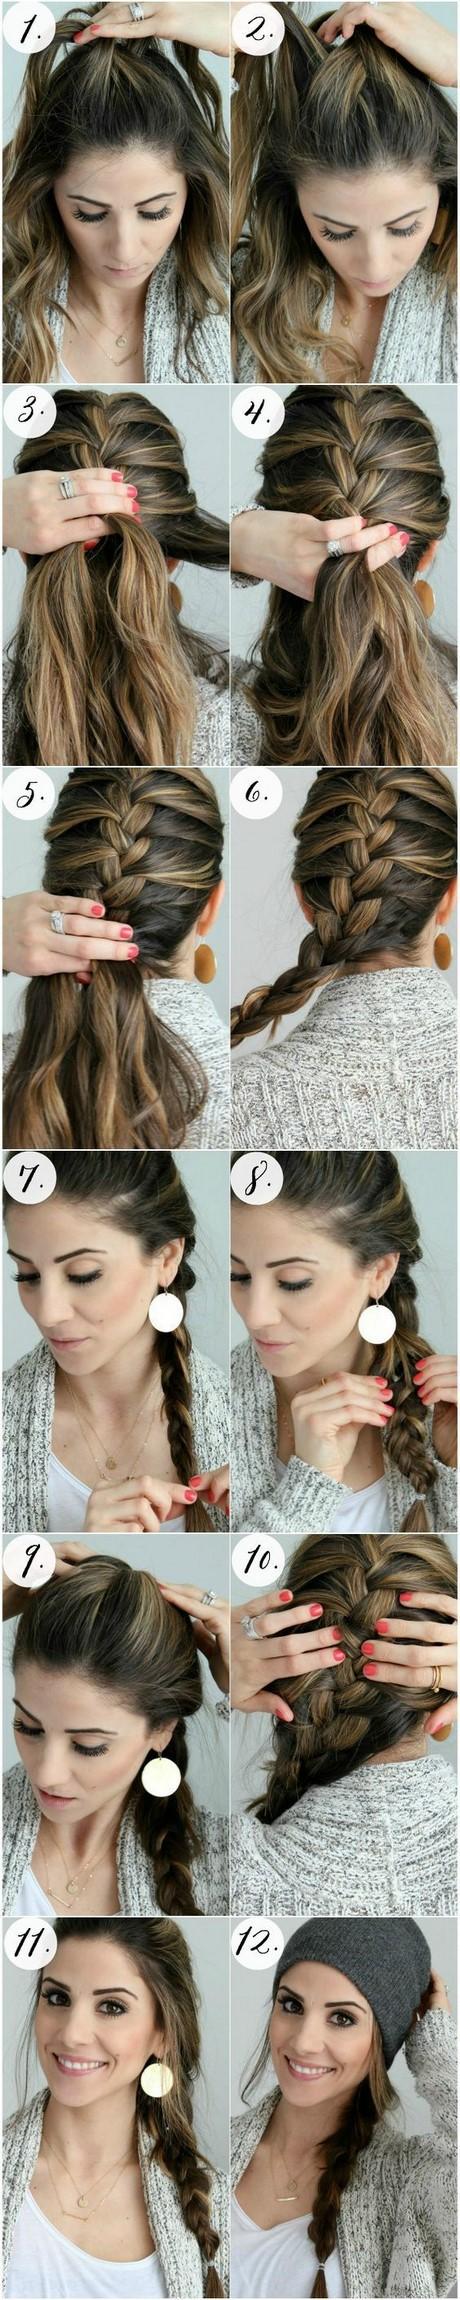 Ideas for braided hairstyles ideas-for-braided-hairstyles-42_13